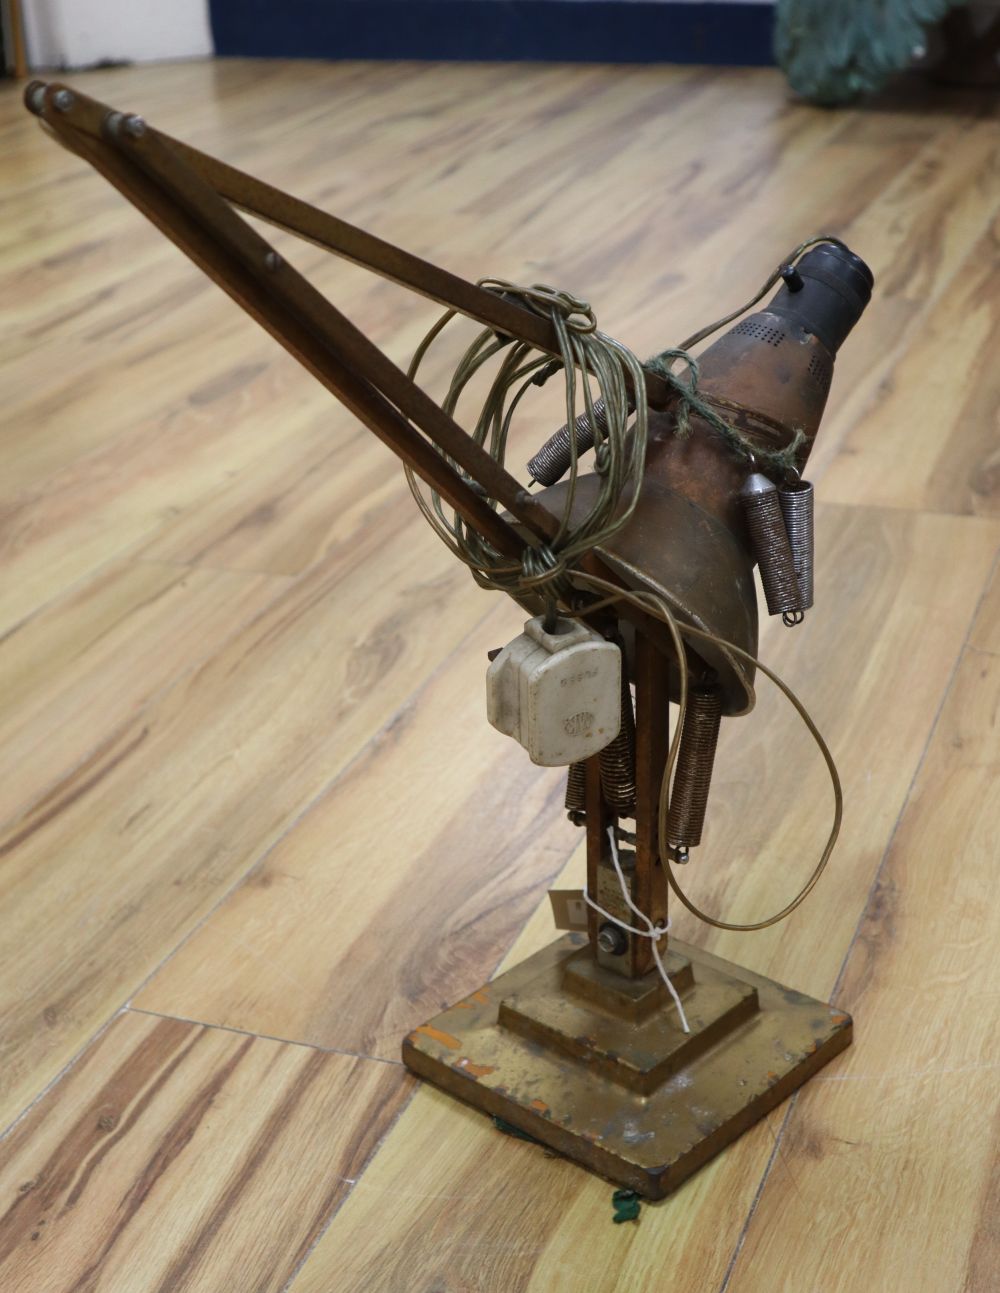 A 1930s/40s anglepoise lamp